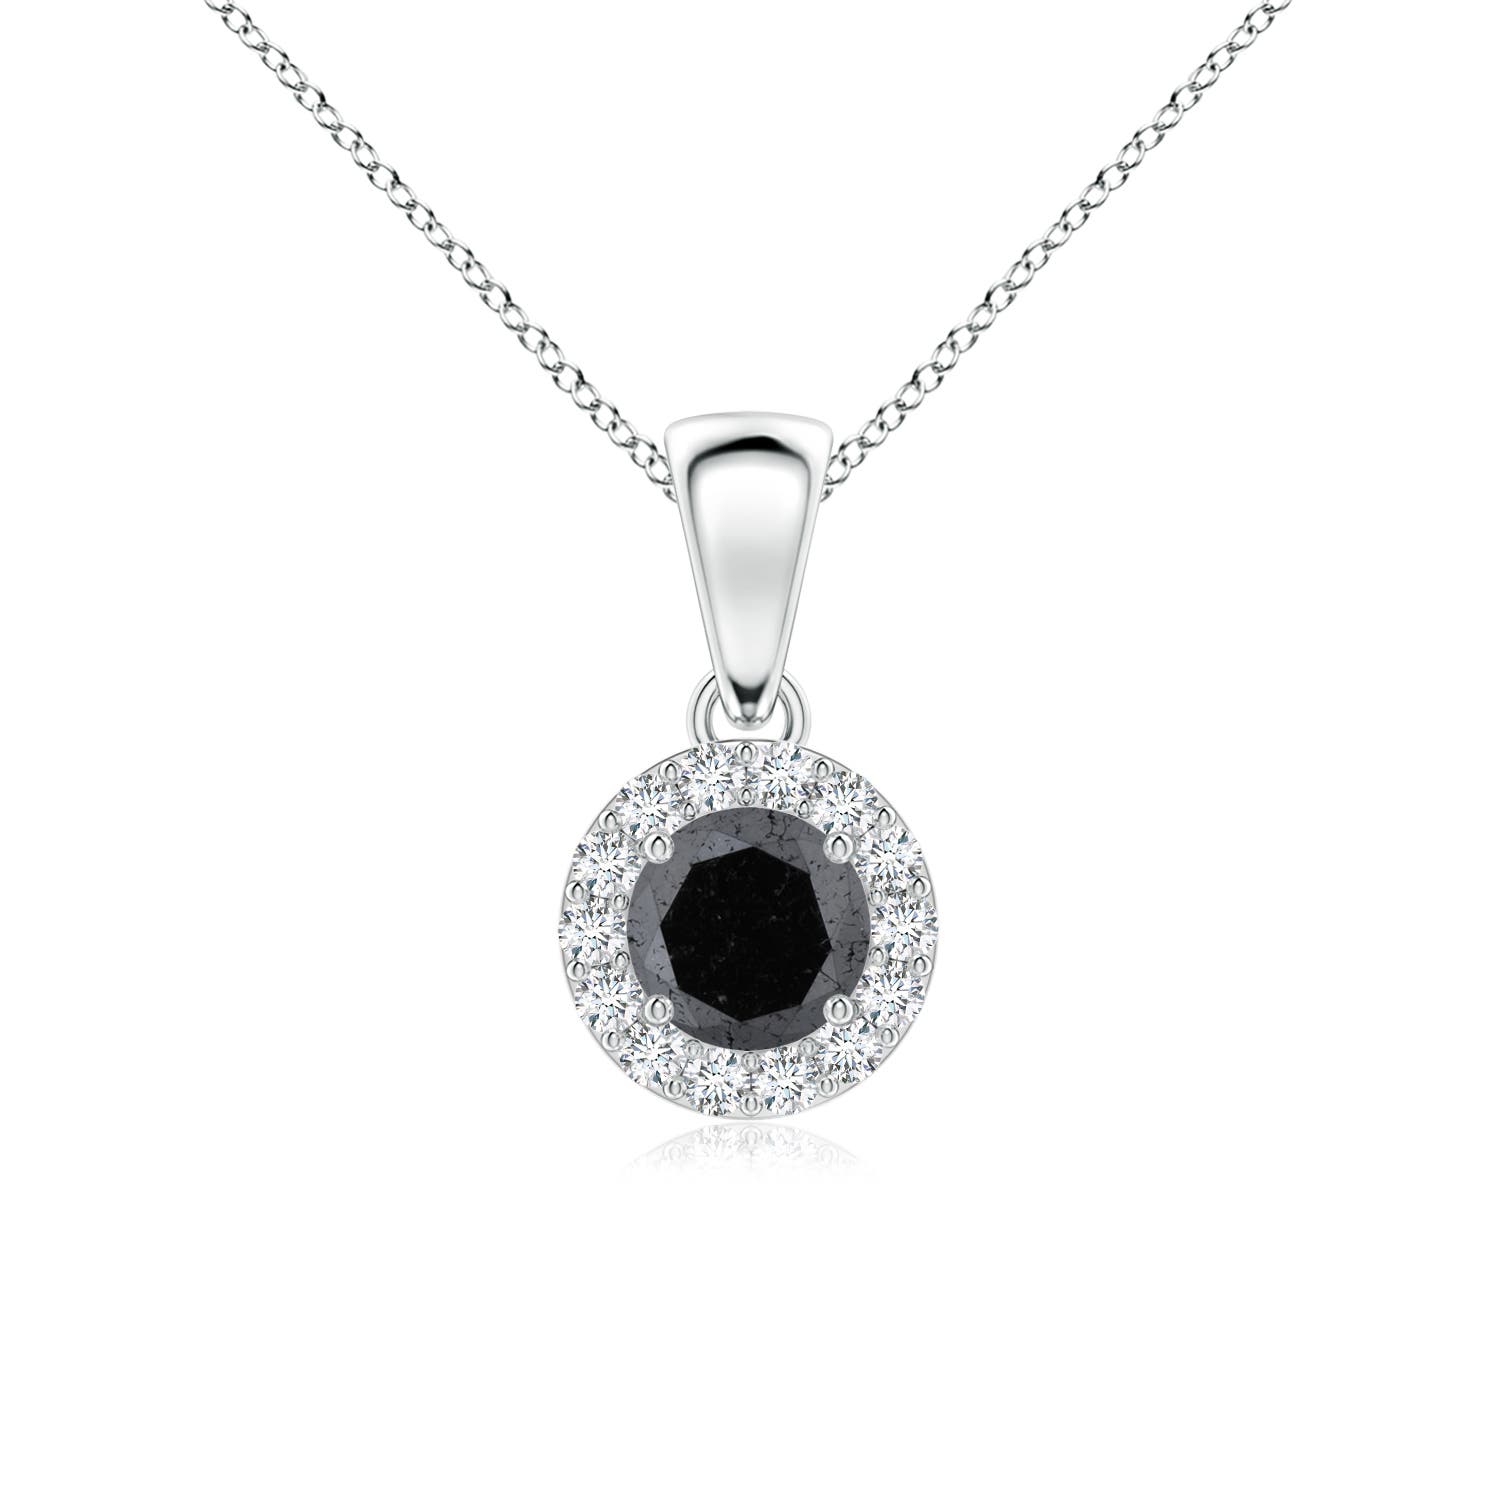 Discover the 3 types of Black Diamonds